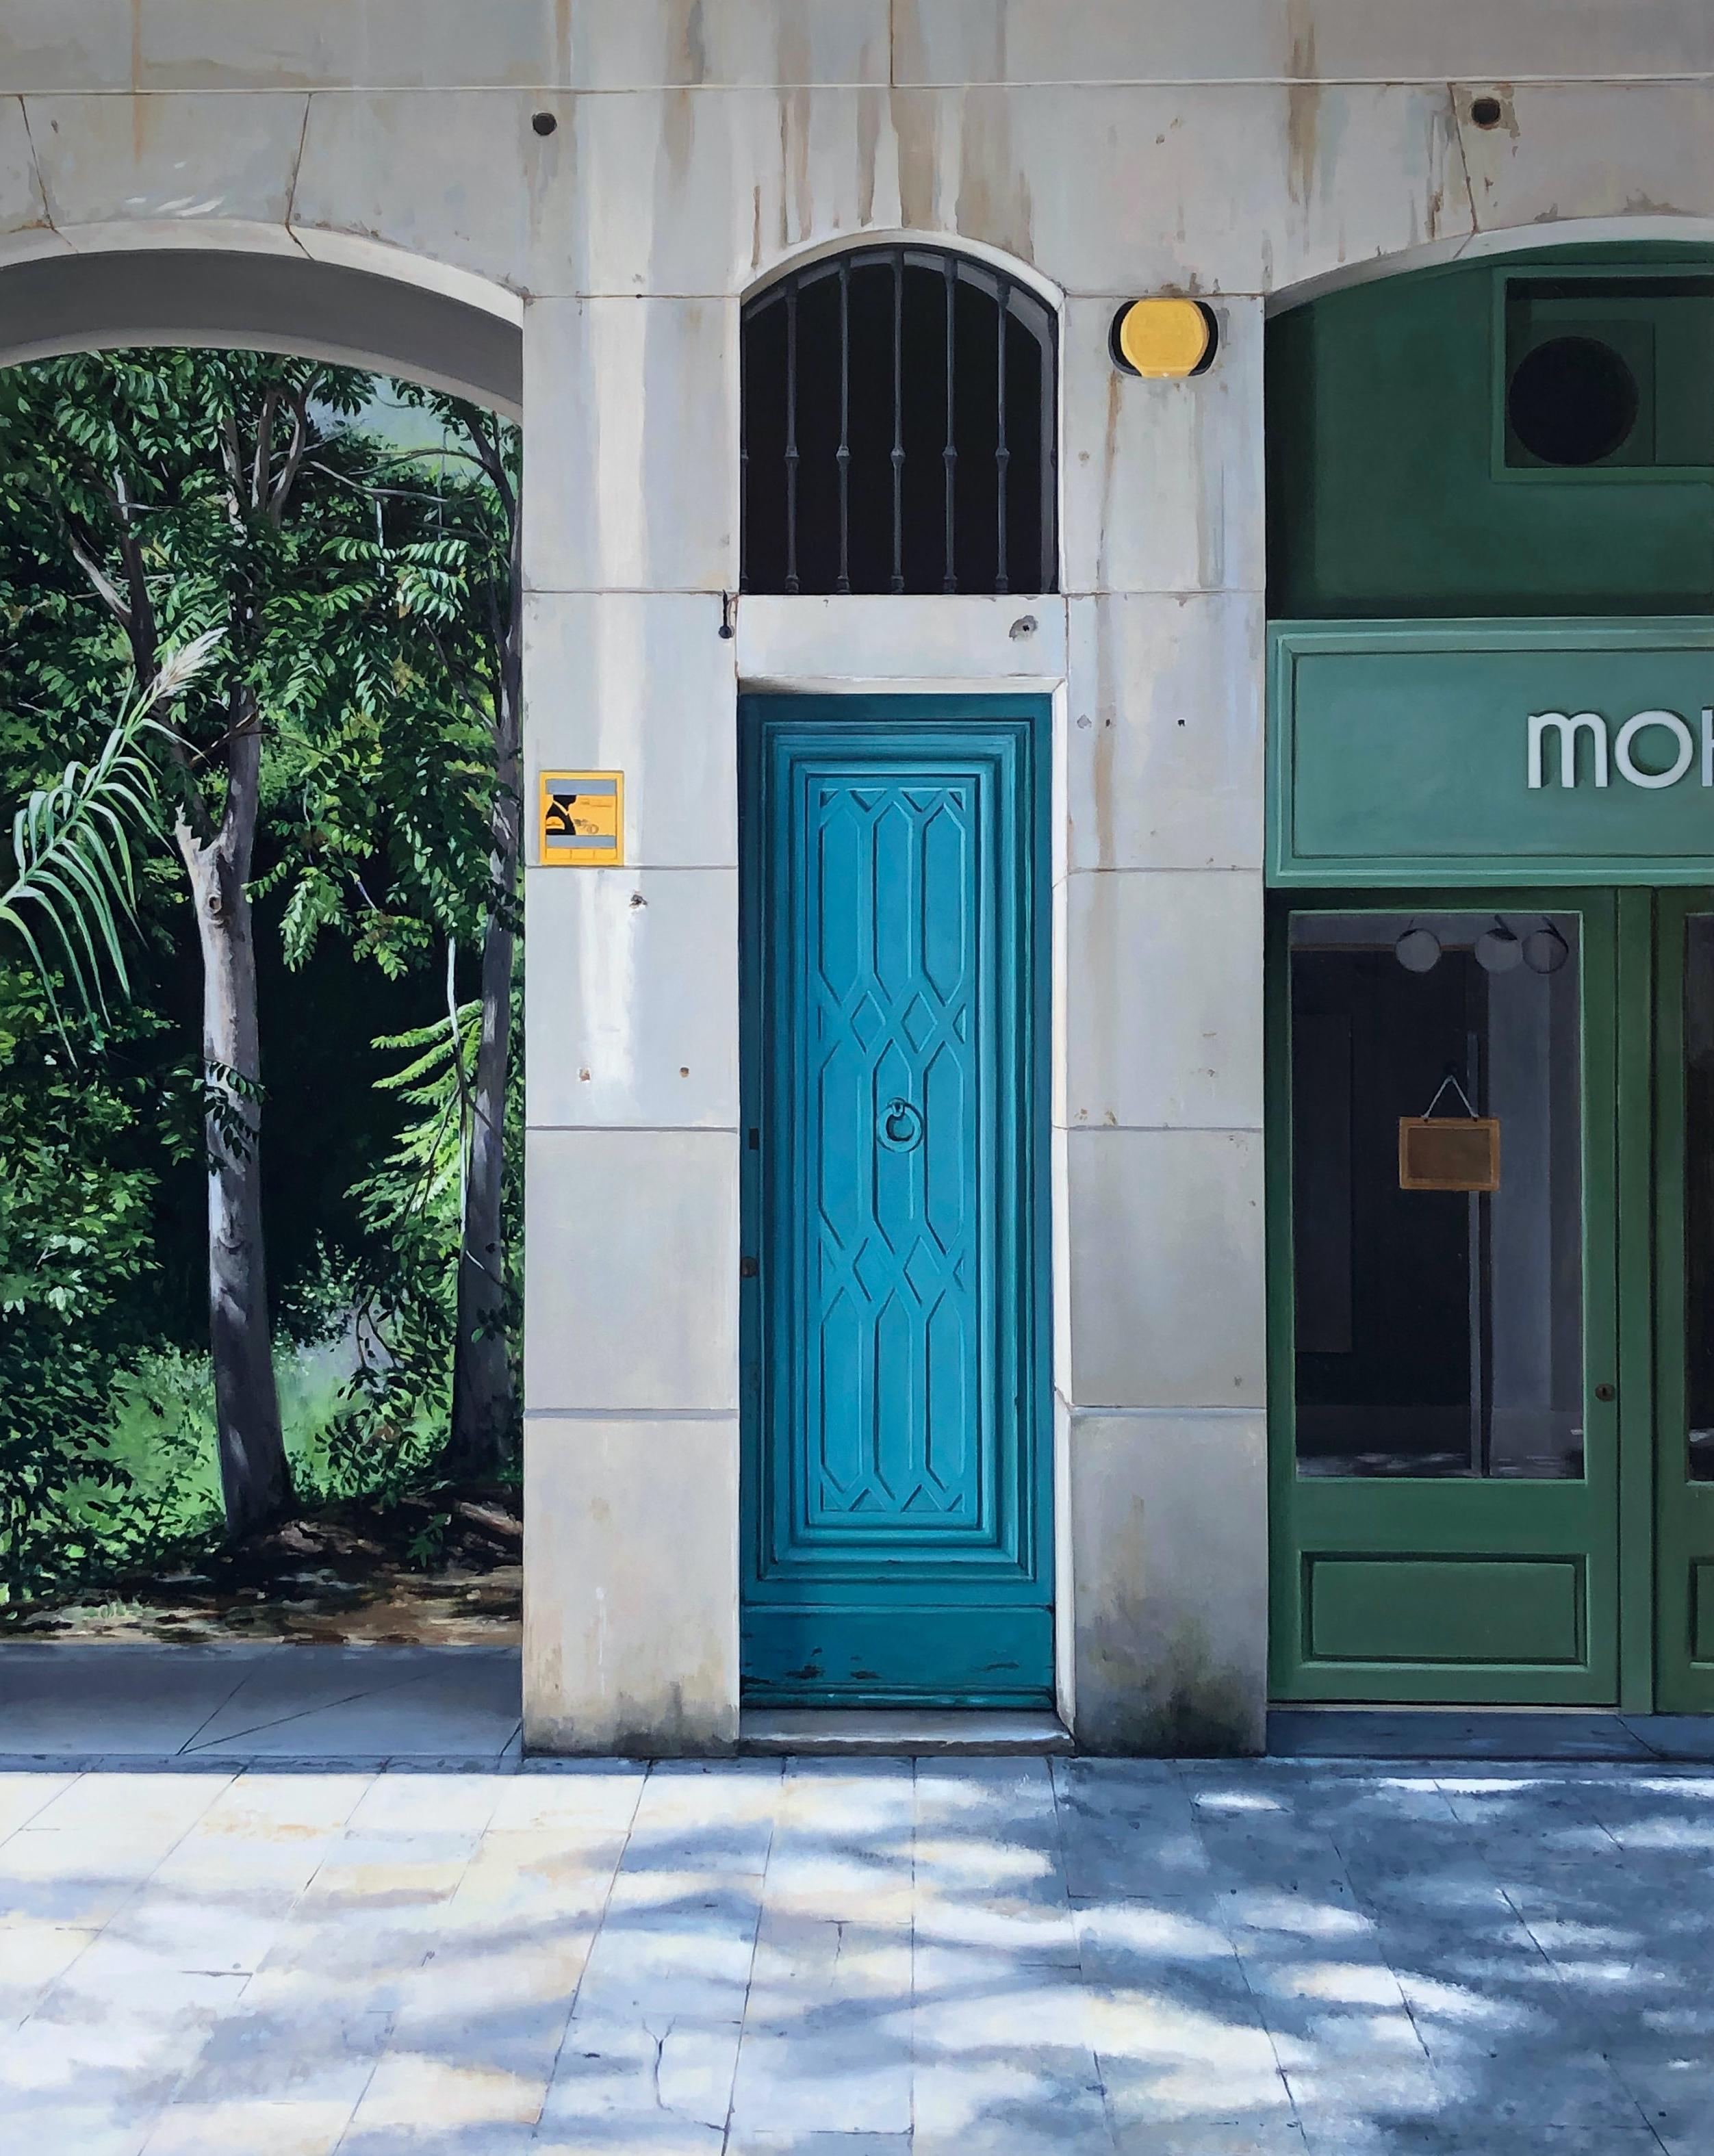 Carol Pylant Landscape Painting - Escapar (To Escape) - Architectural Imagery, Doorways and Lush Tropical Scene